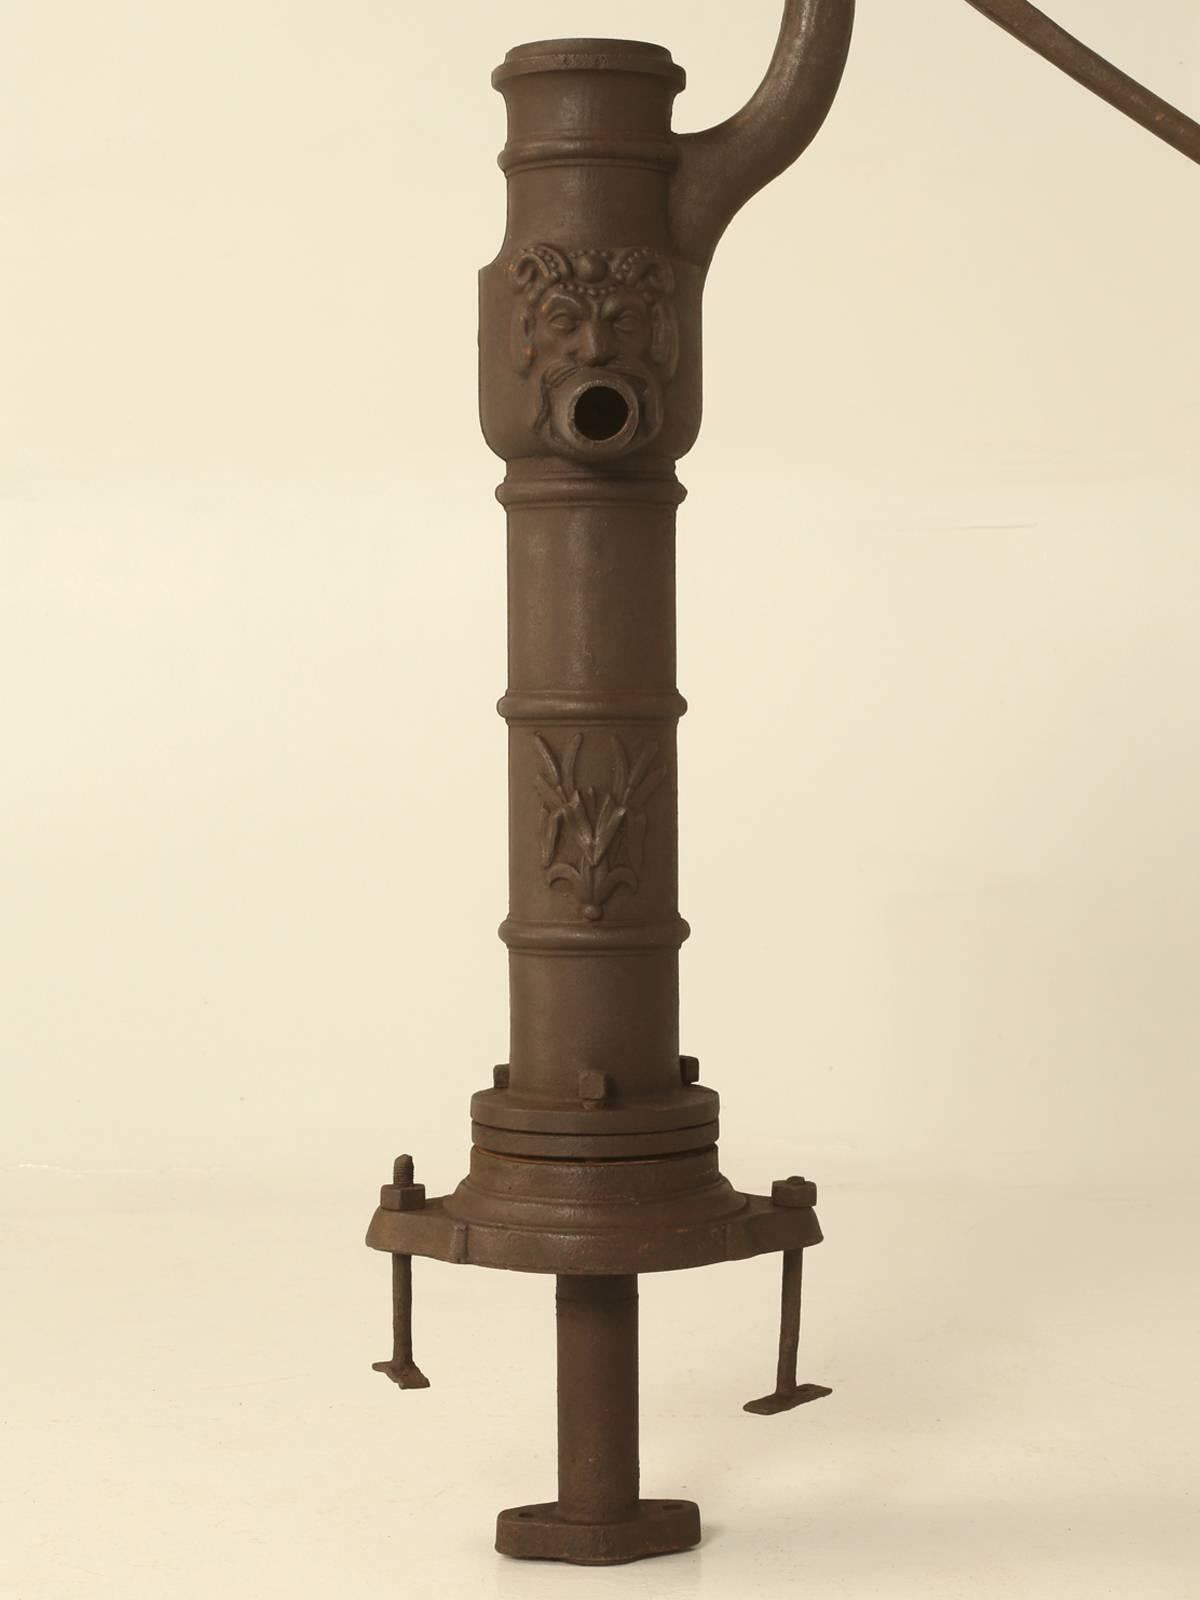 Antique French Fountain water pump, that could be made functional again, or simply be used as a garden ornament. We are listing several on 1stdibs for sale and all very reasonable.